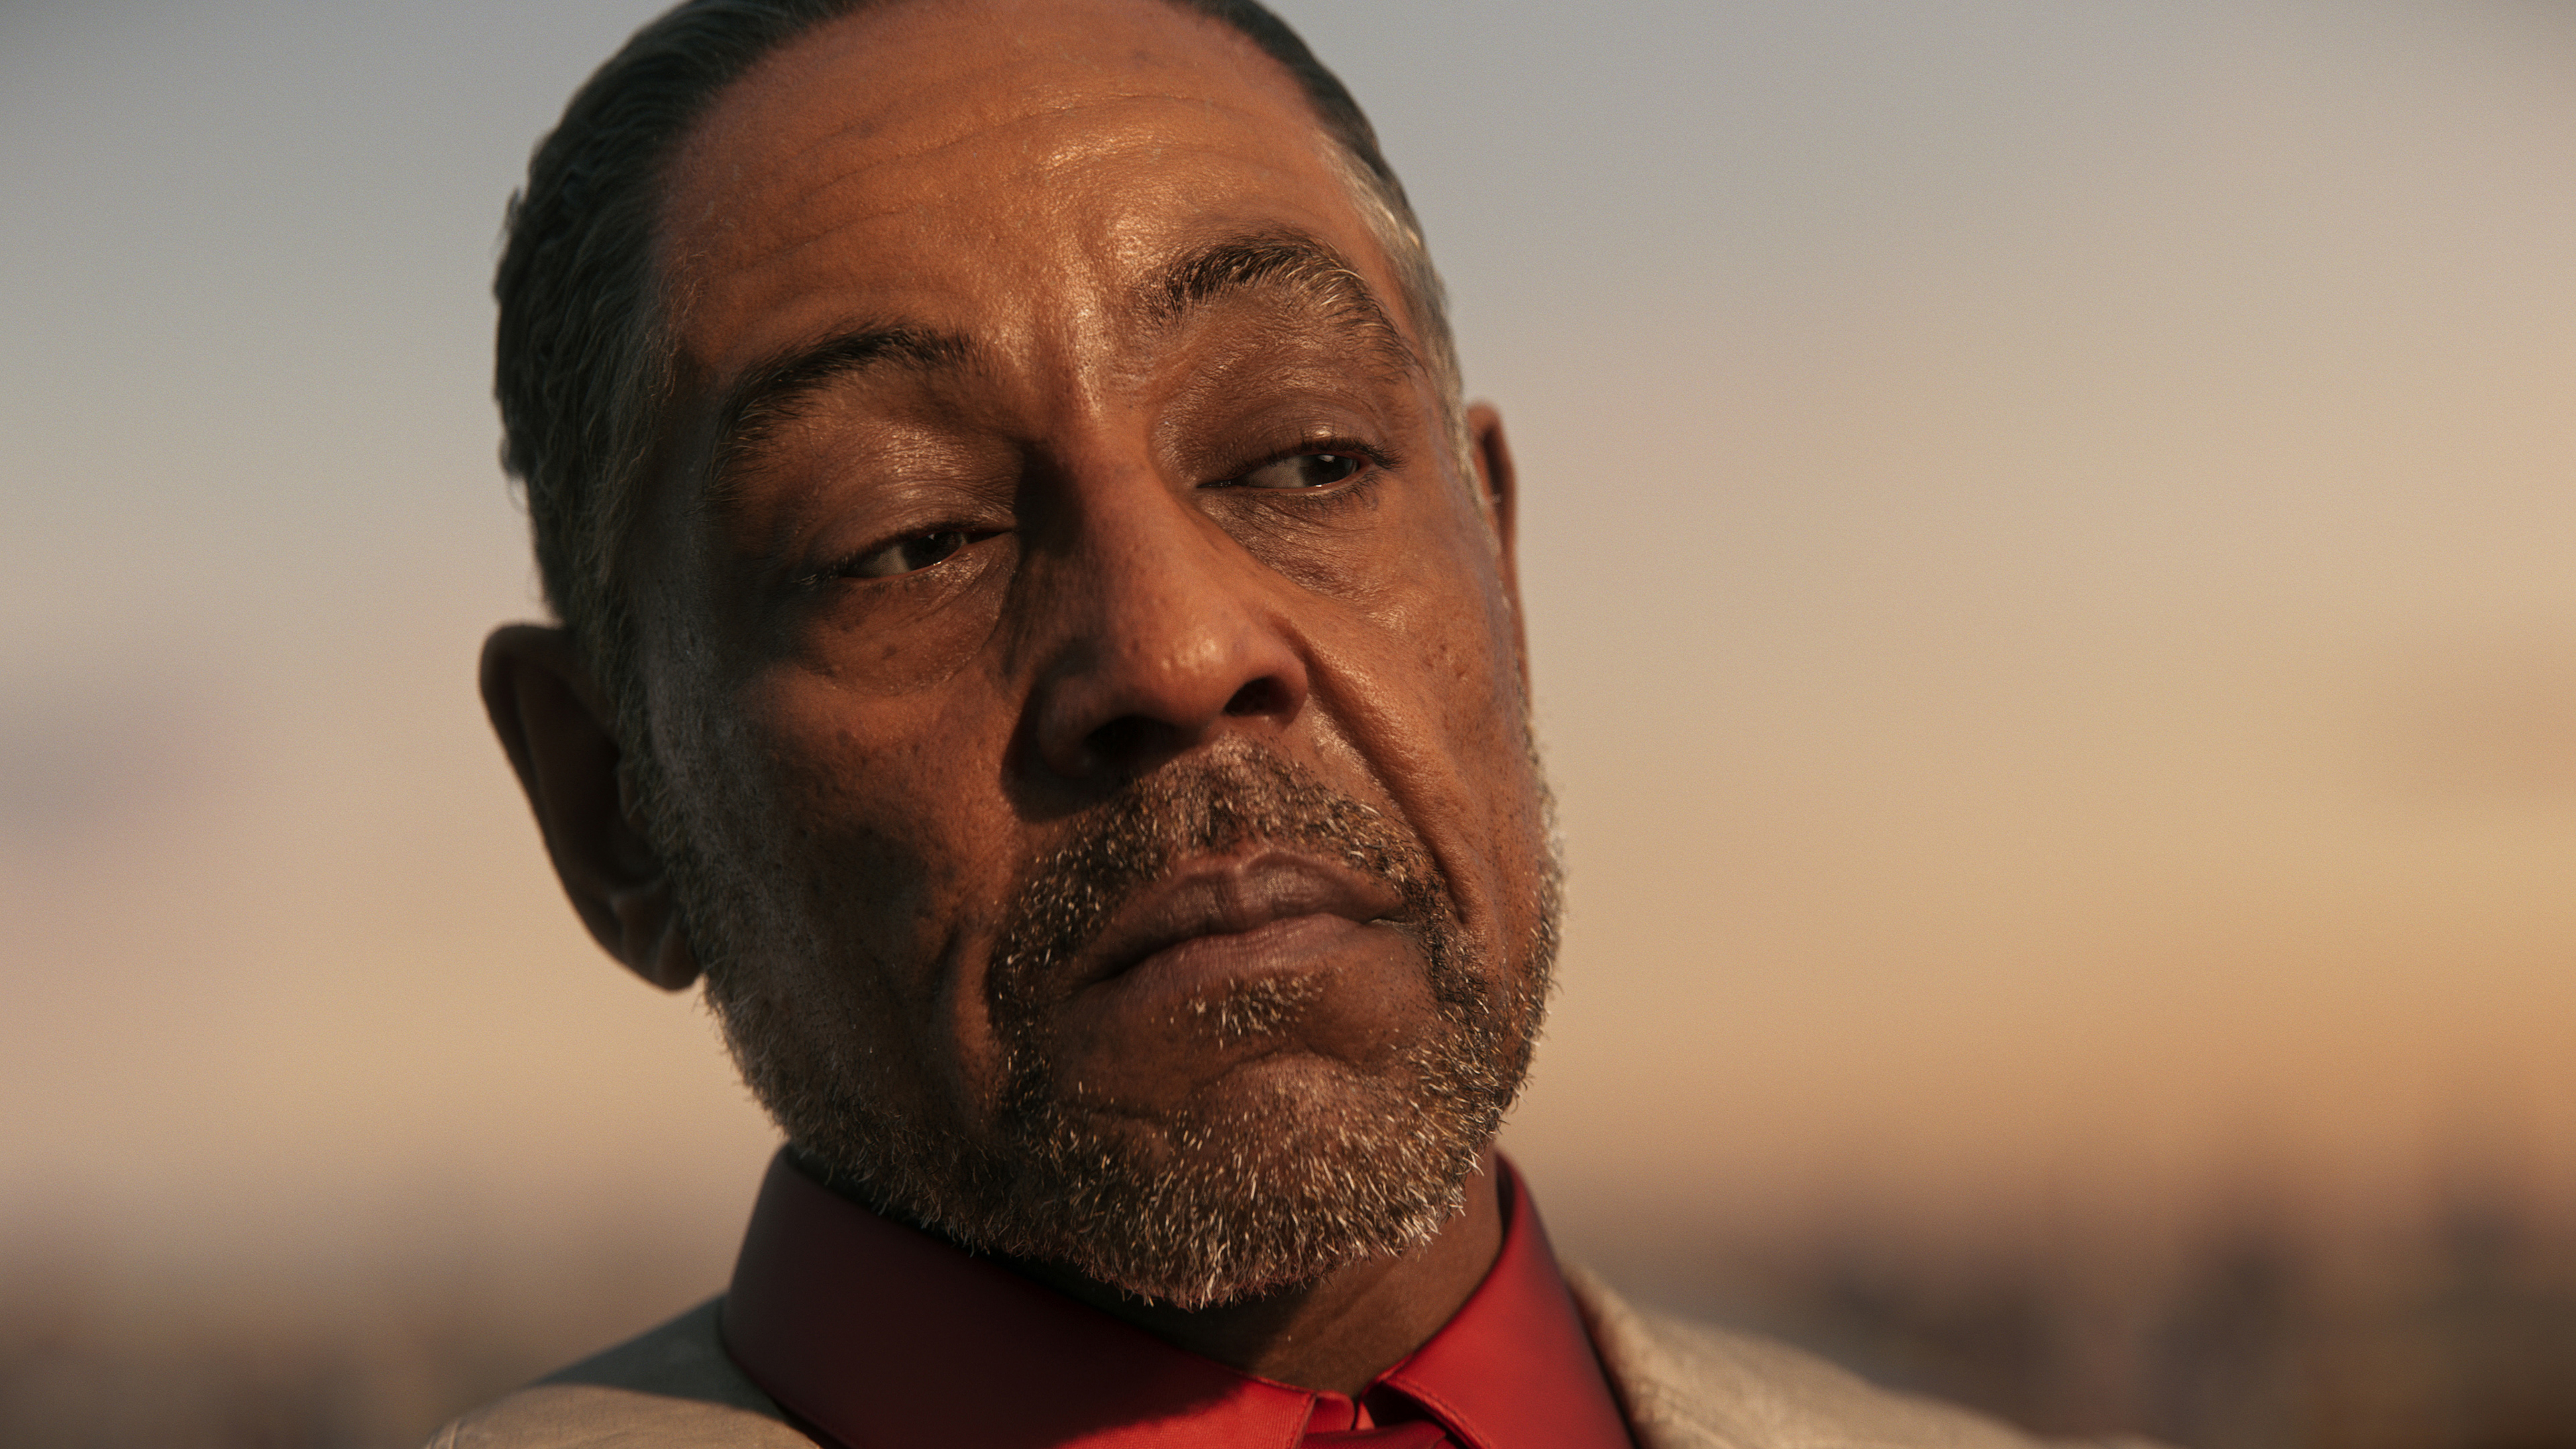 3840x2160 Giancarlo Esposito Far Cry 6 4k Wallpaper Hd Games 4k Wallpapers Images Photos And